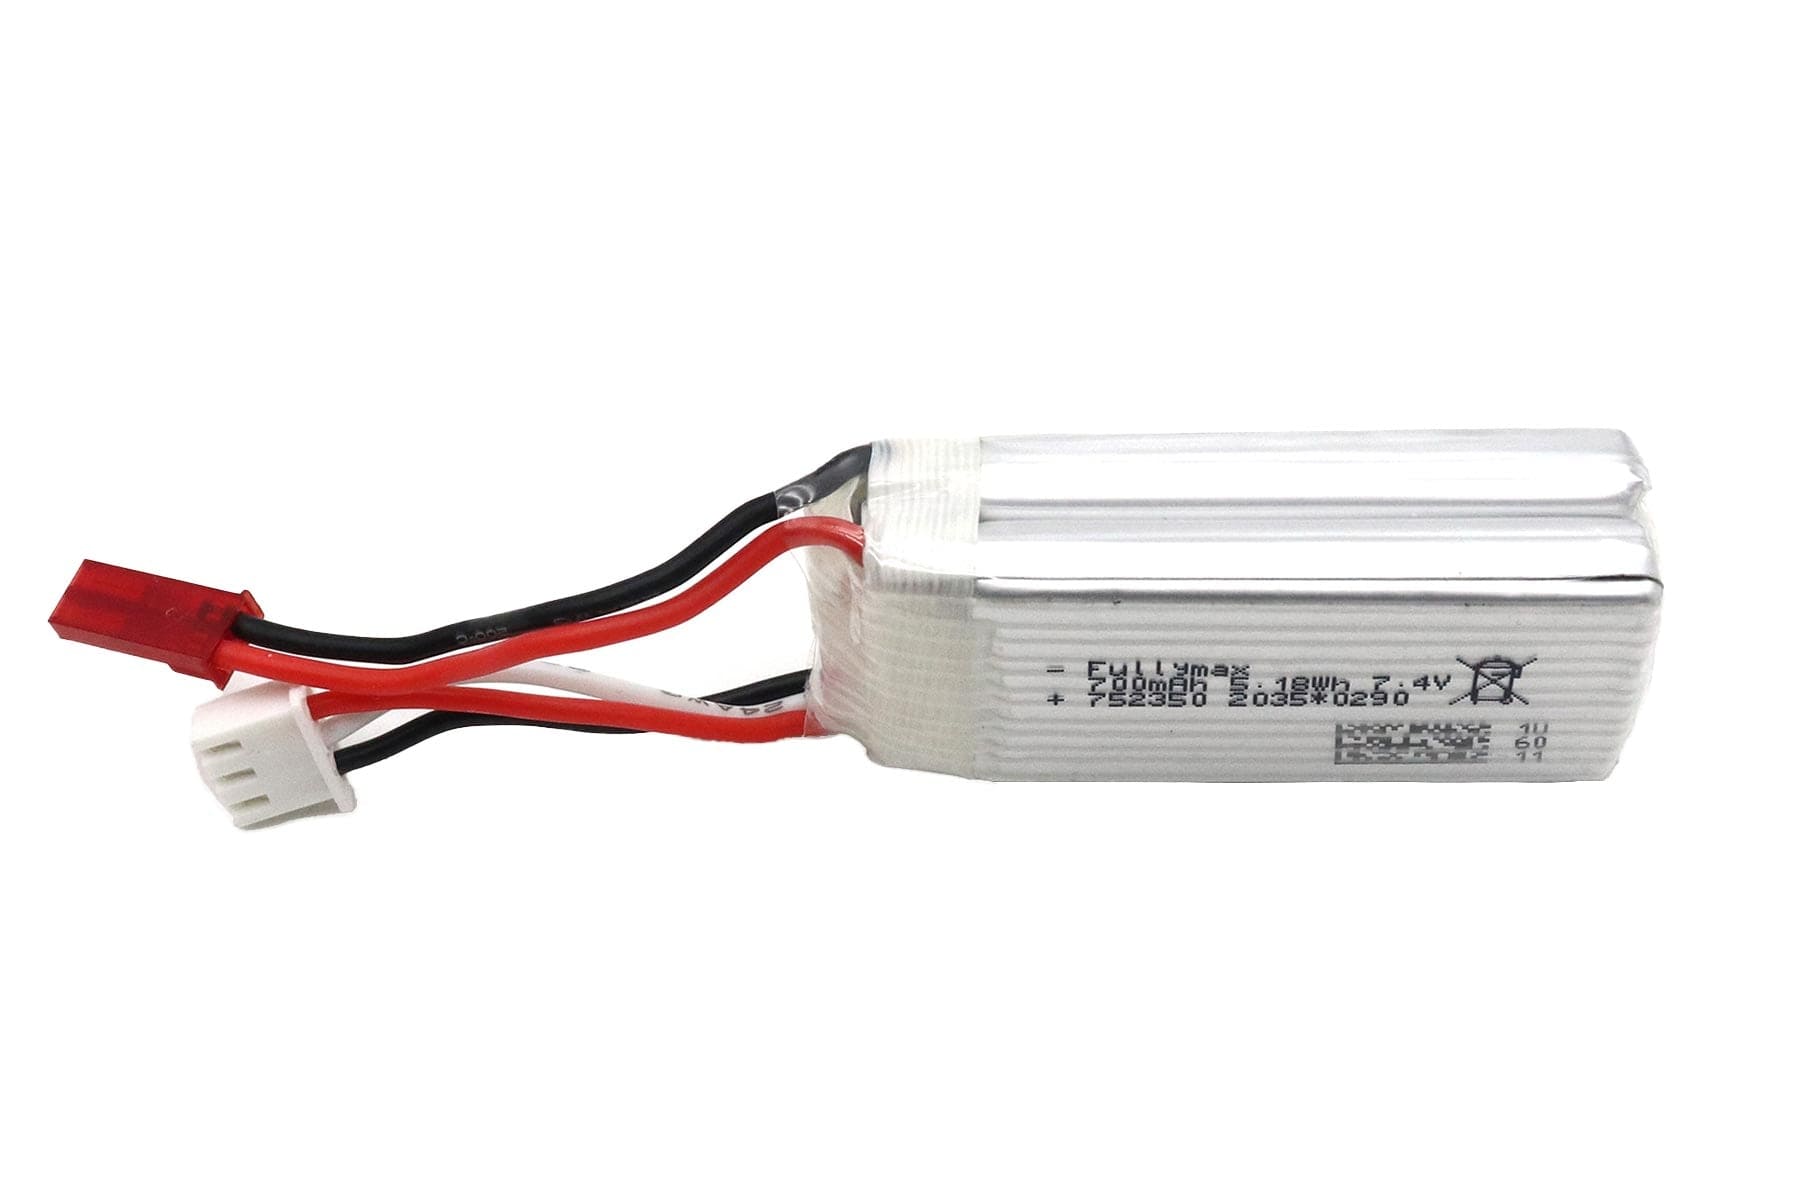 RotorScale 700mAh 2S 7.4V 20C LiPo Battery with JST Connector RSH1002-024